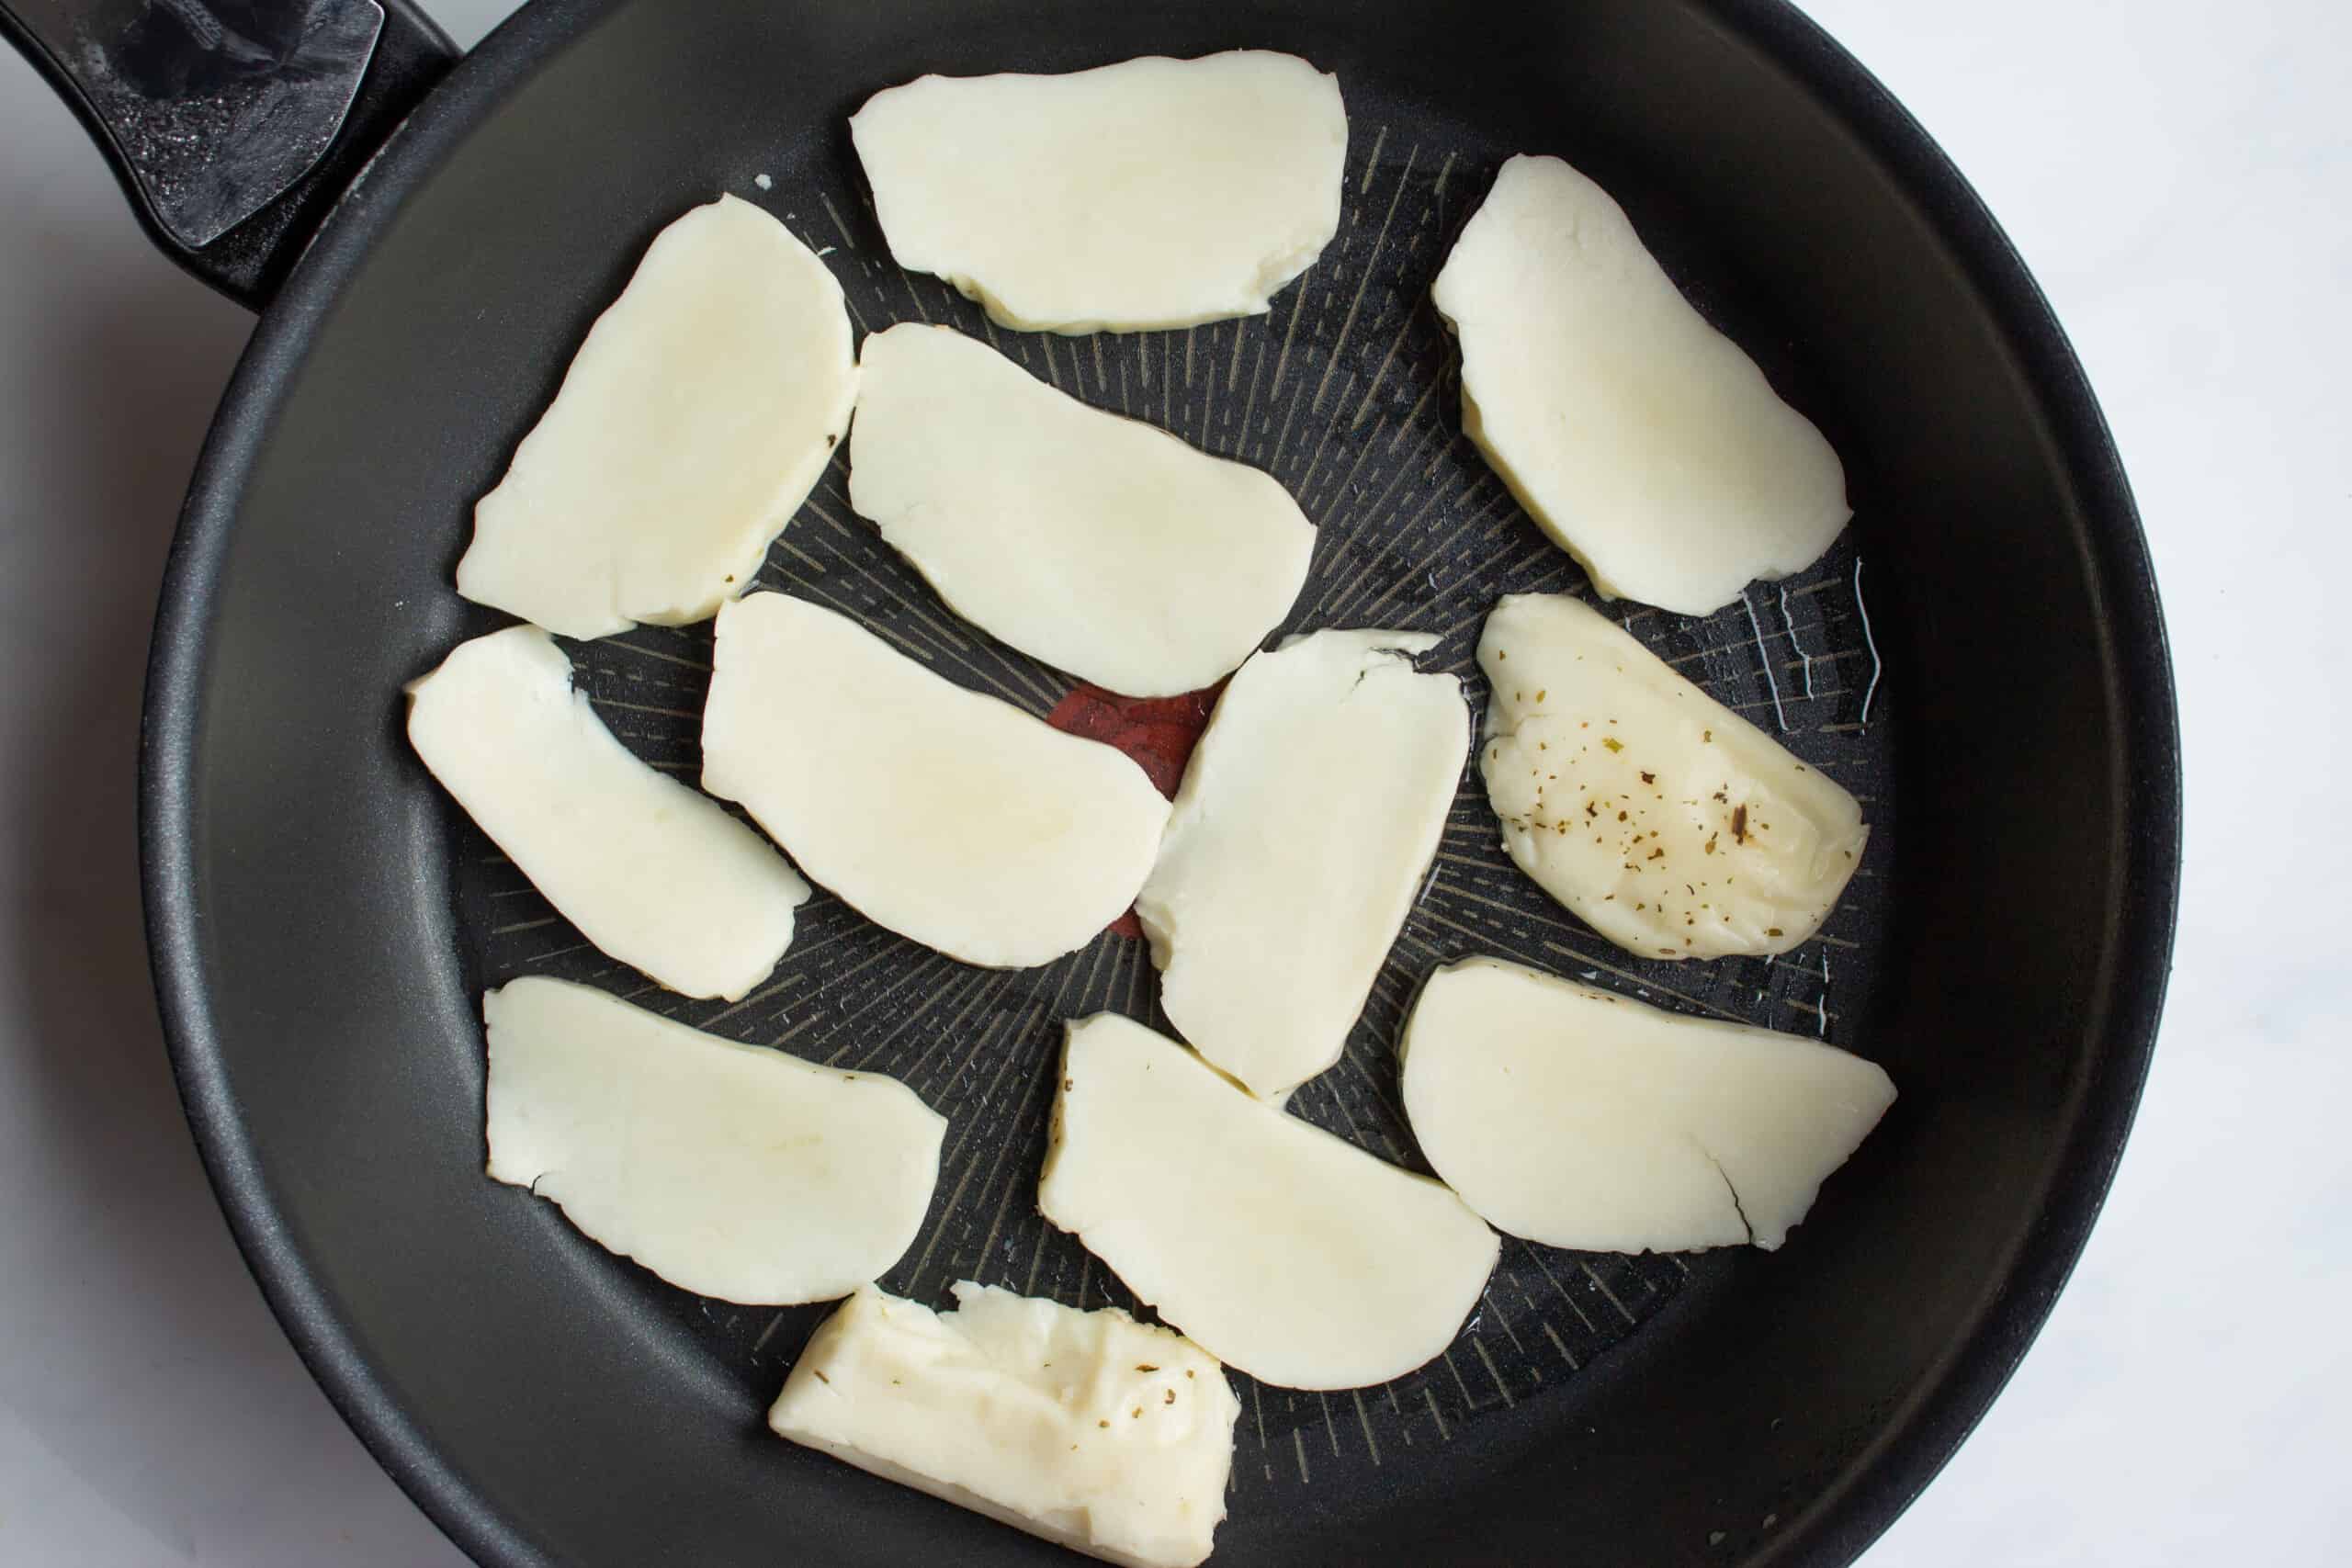 Thinly sliced halloumi in a black frying pan.